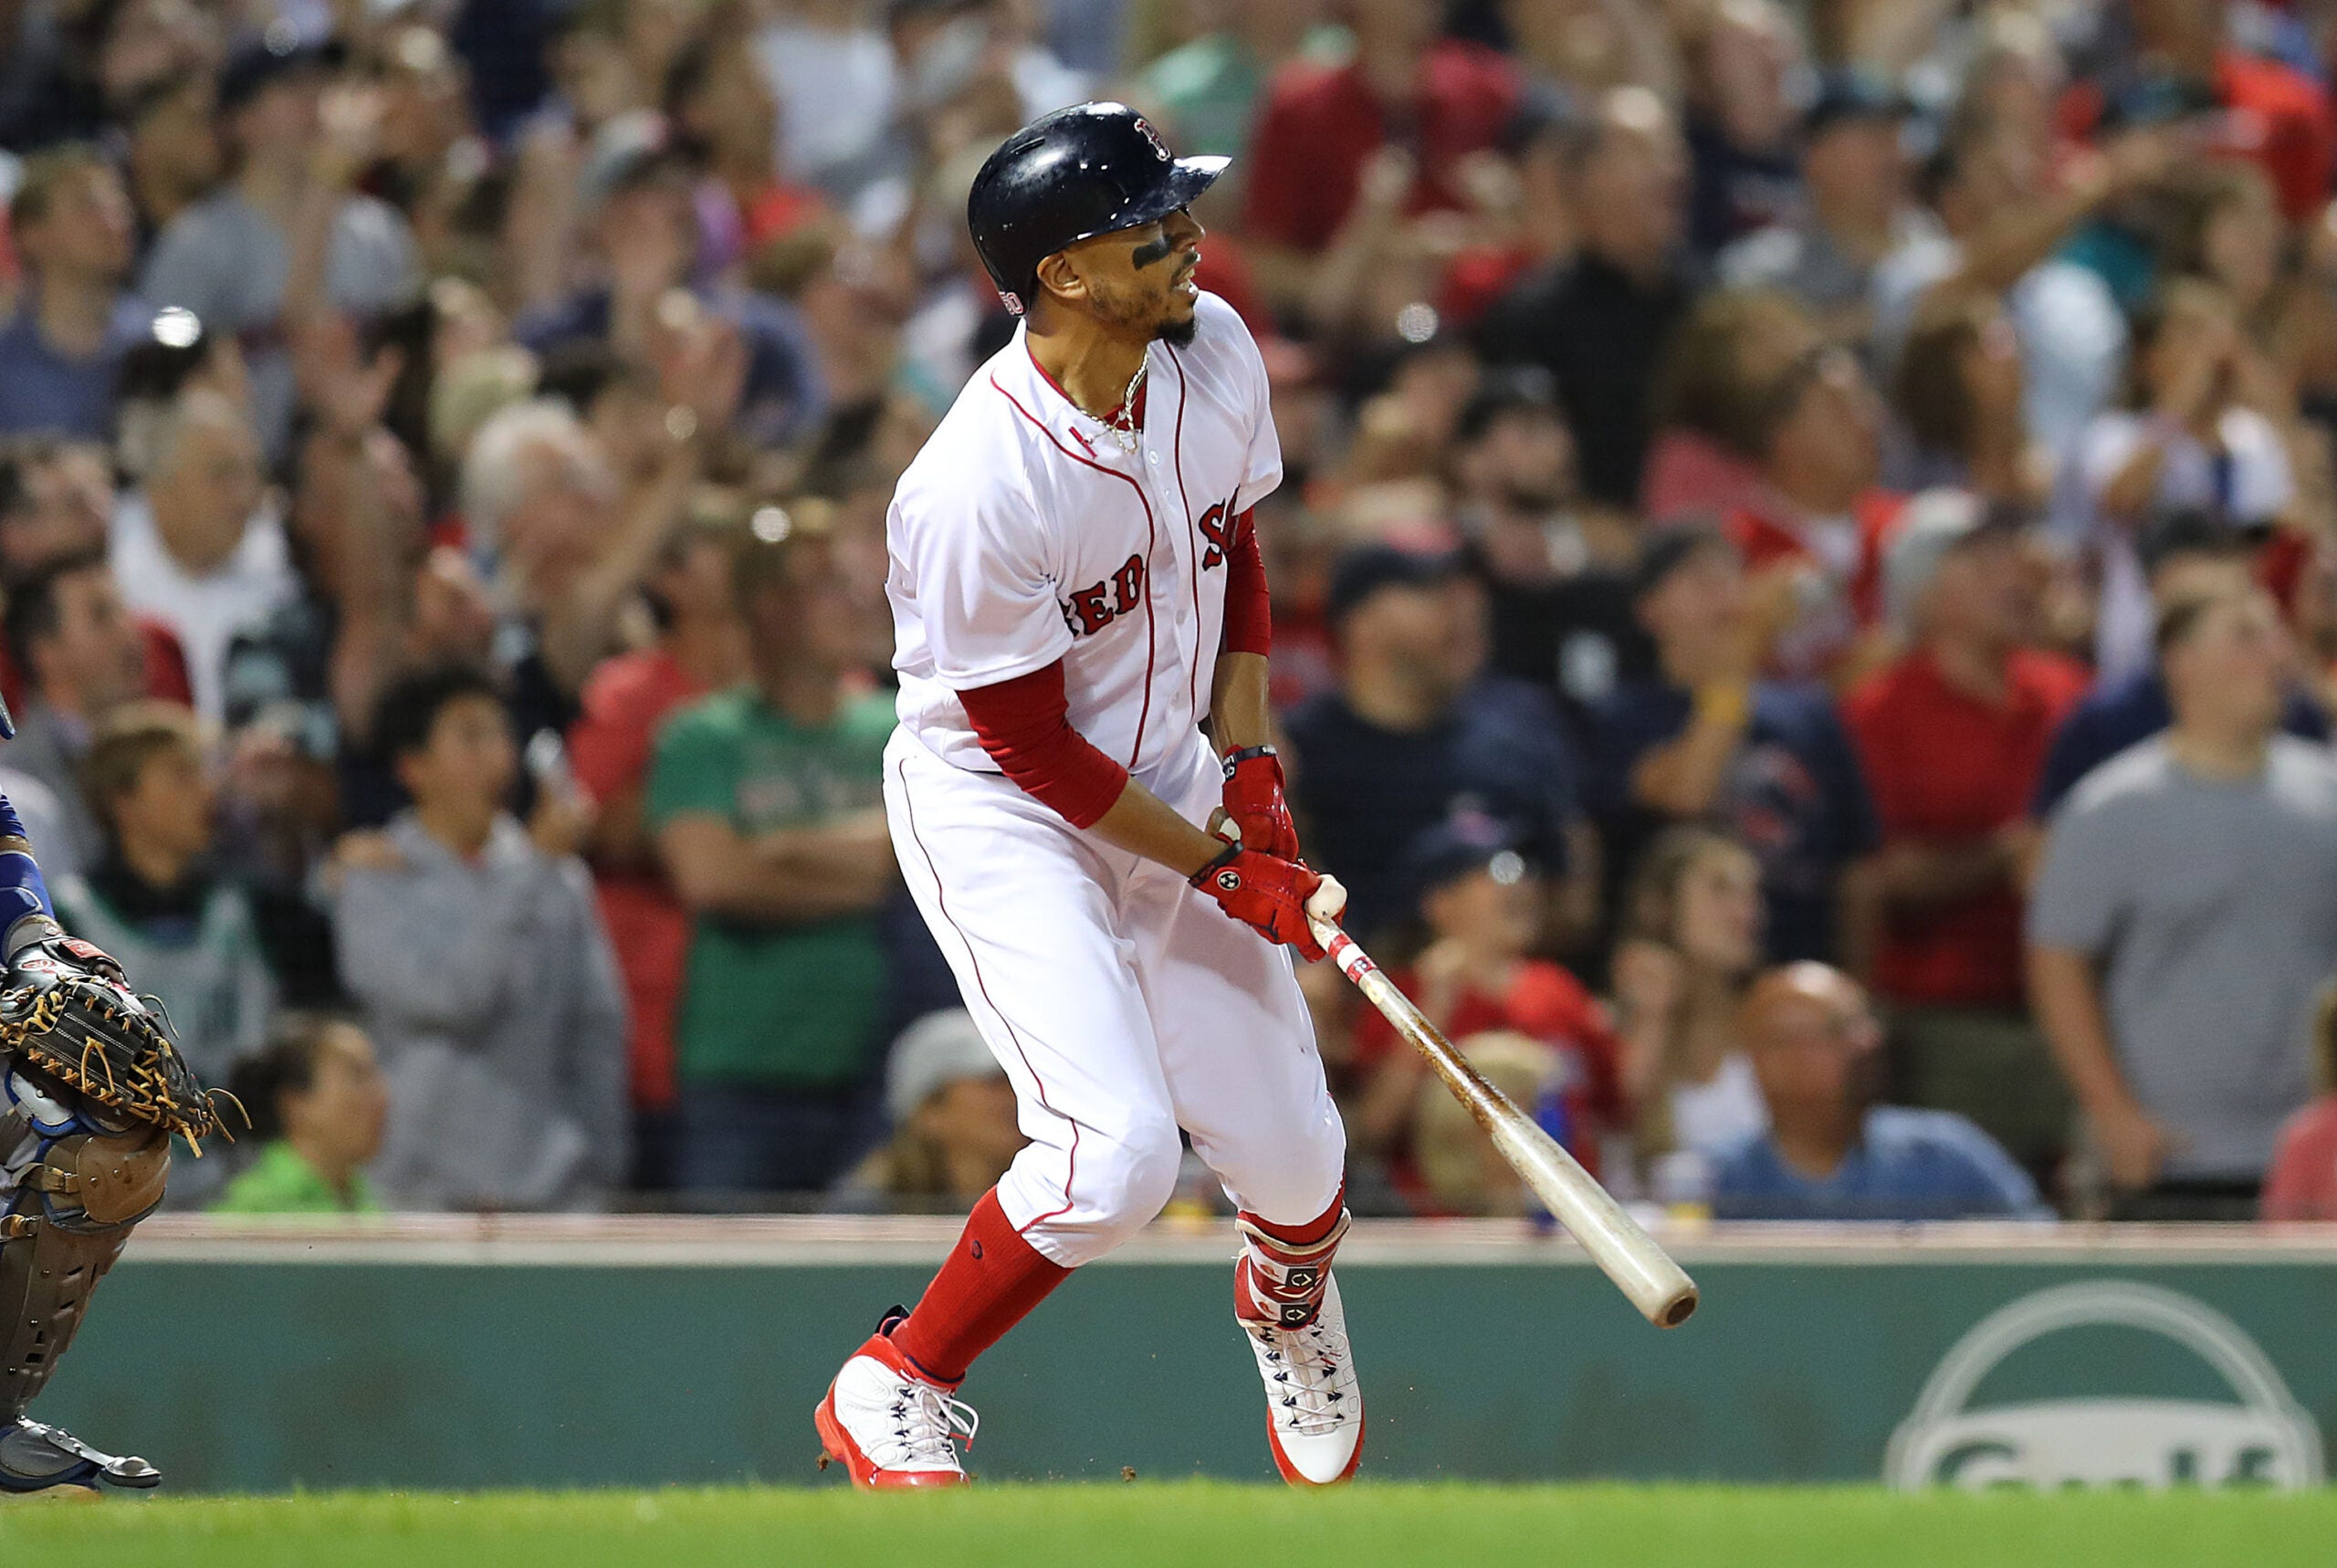 Mookie Betts is Making the Boston Red Sox Look Like Fools